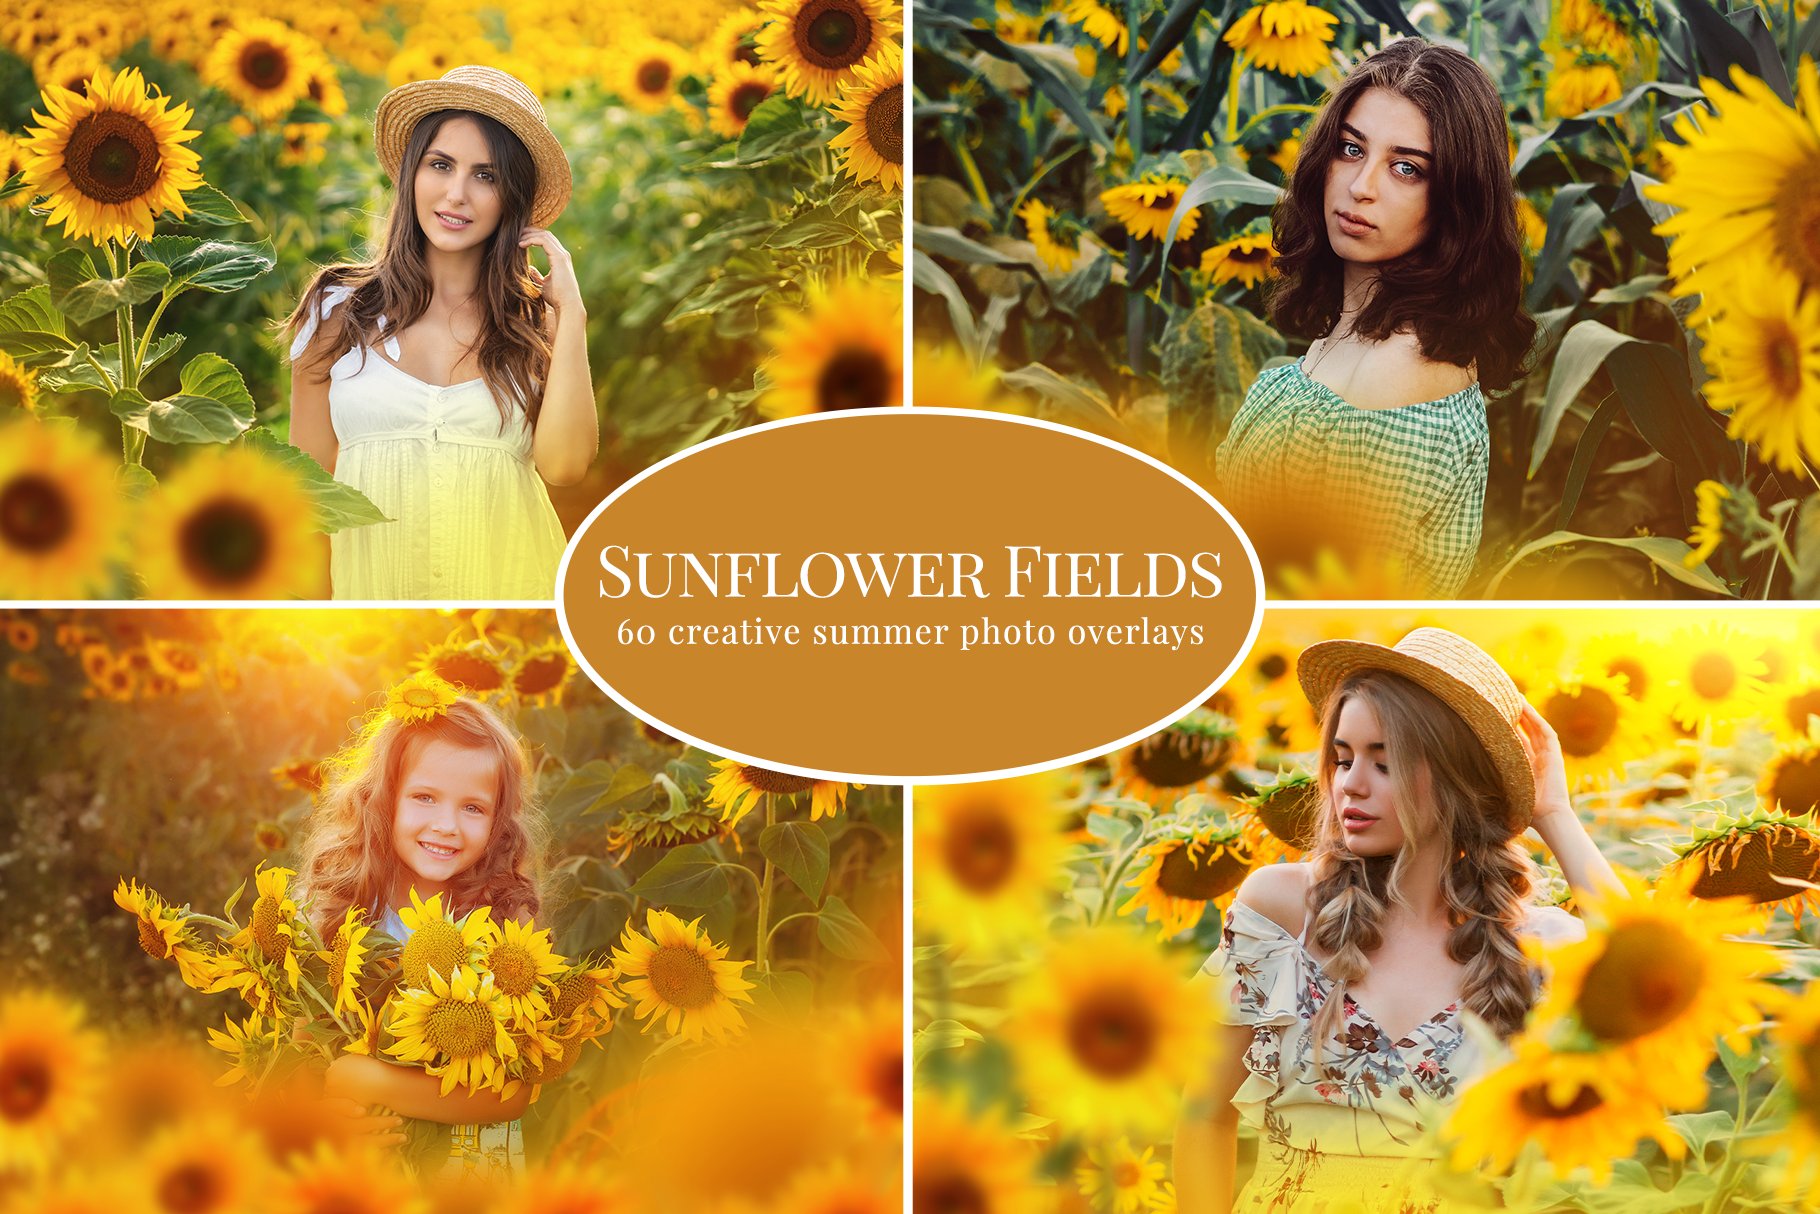 Sunflower Fields photo overlayscover image.